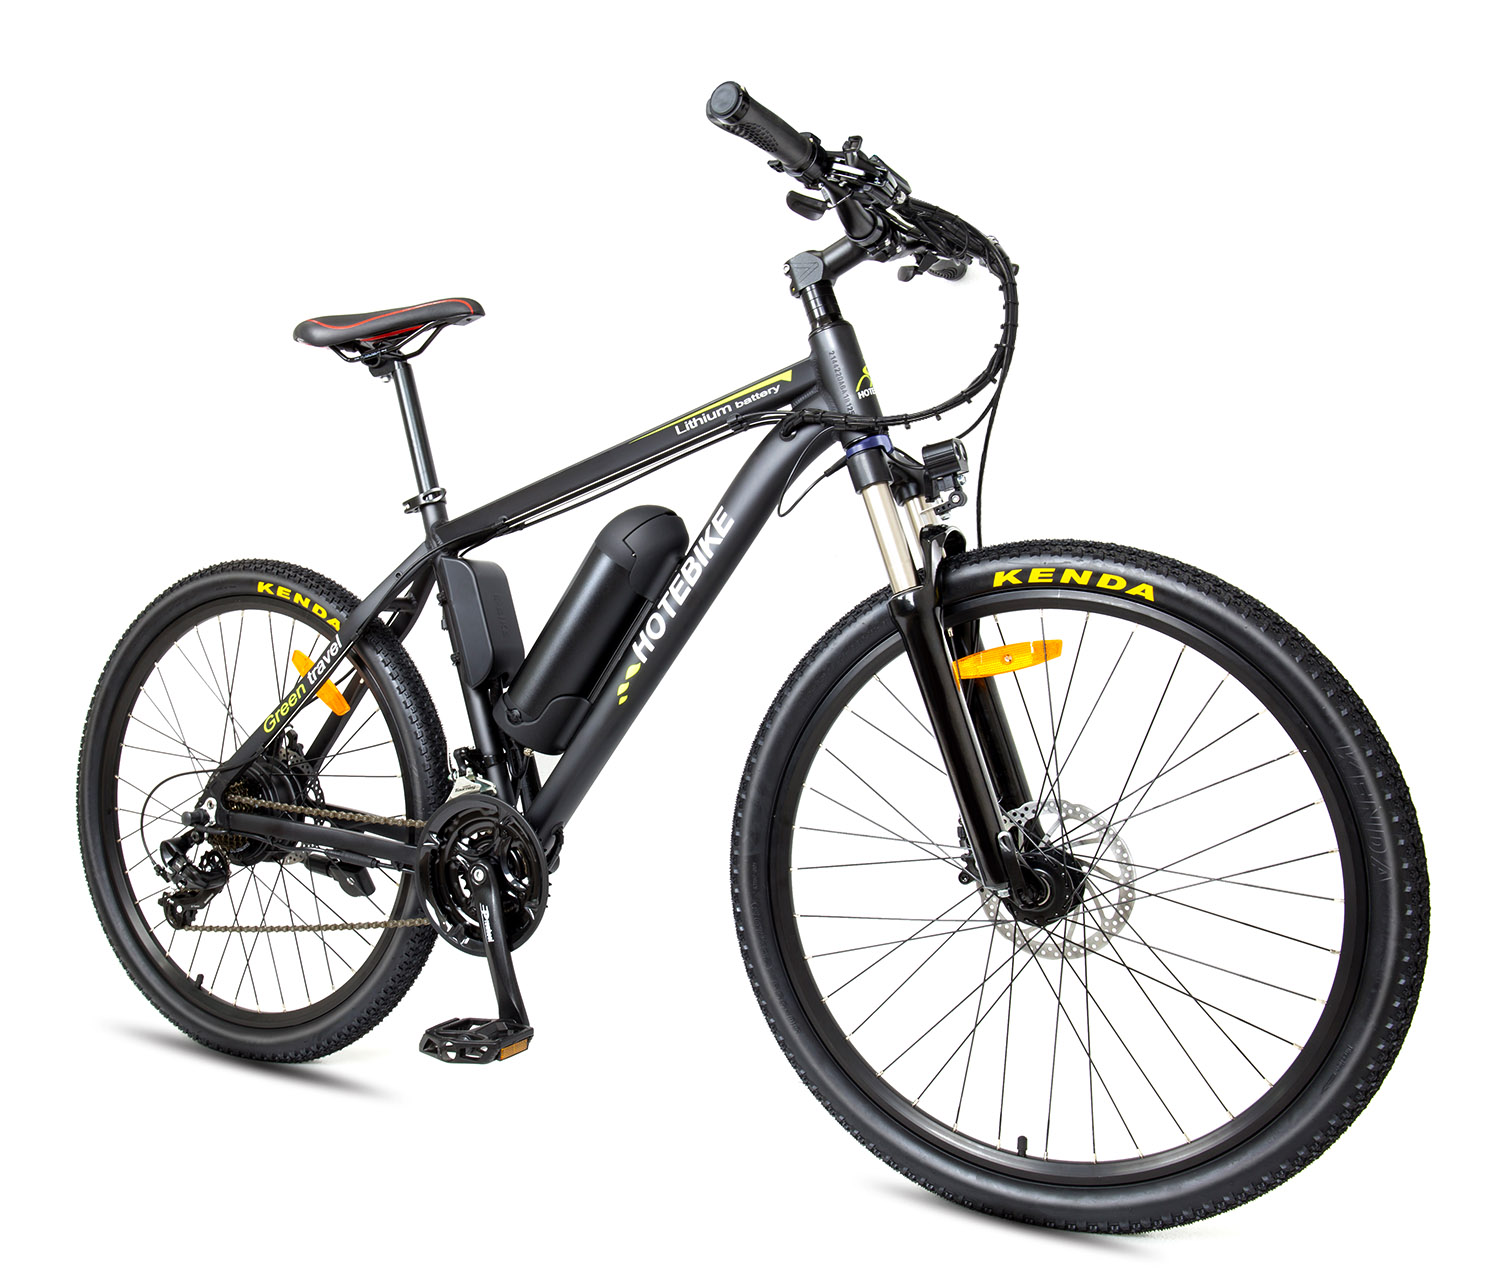 26″ Electric Mountain Bike with 36V 350W Brushless Motor for Adults